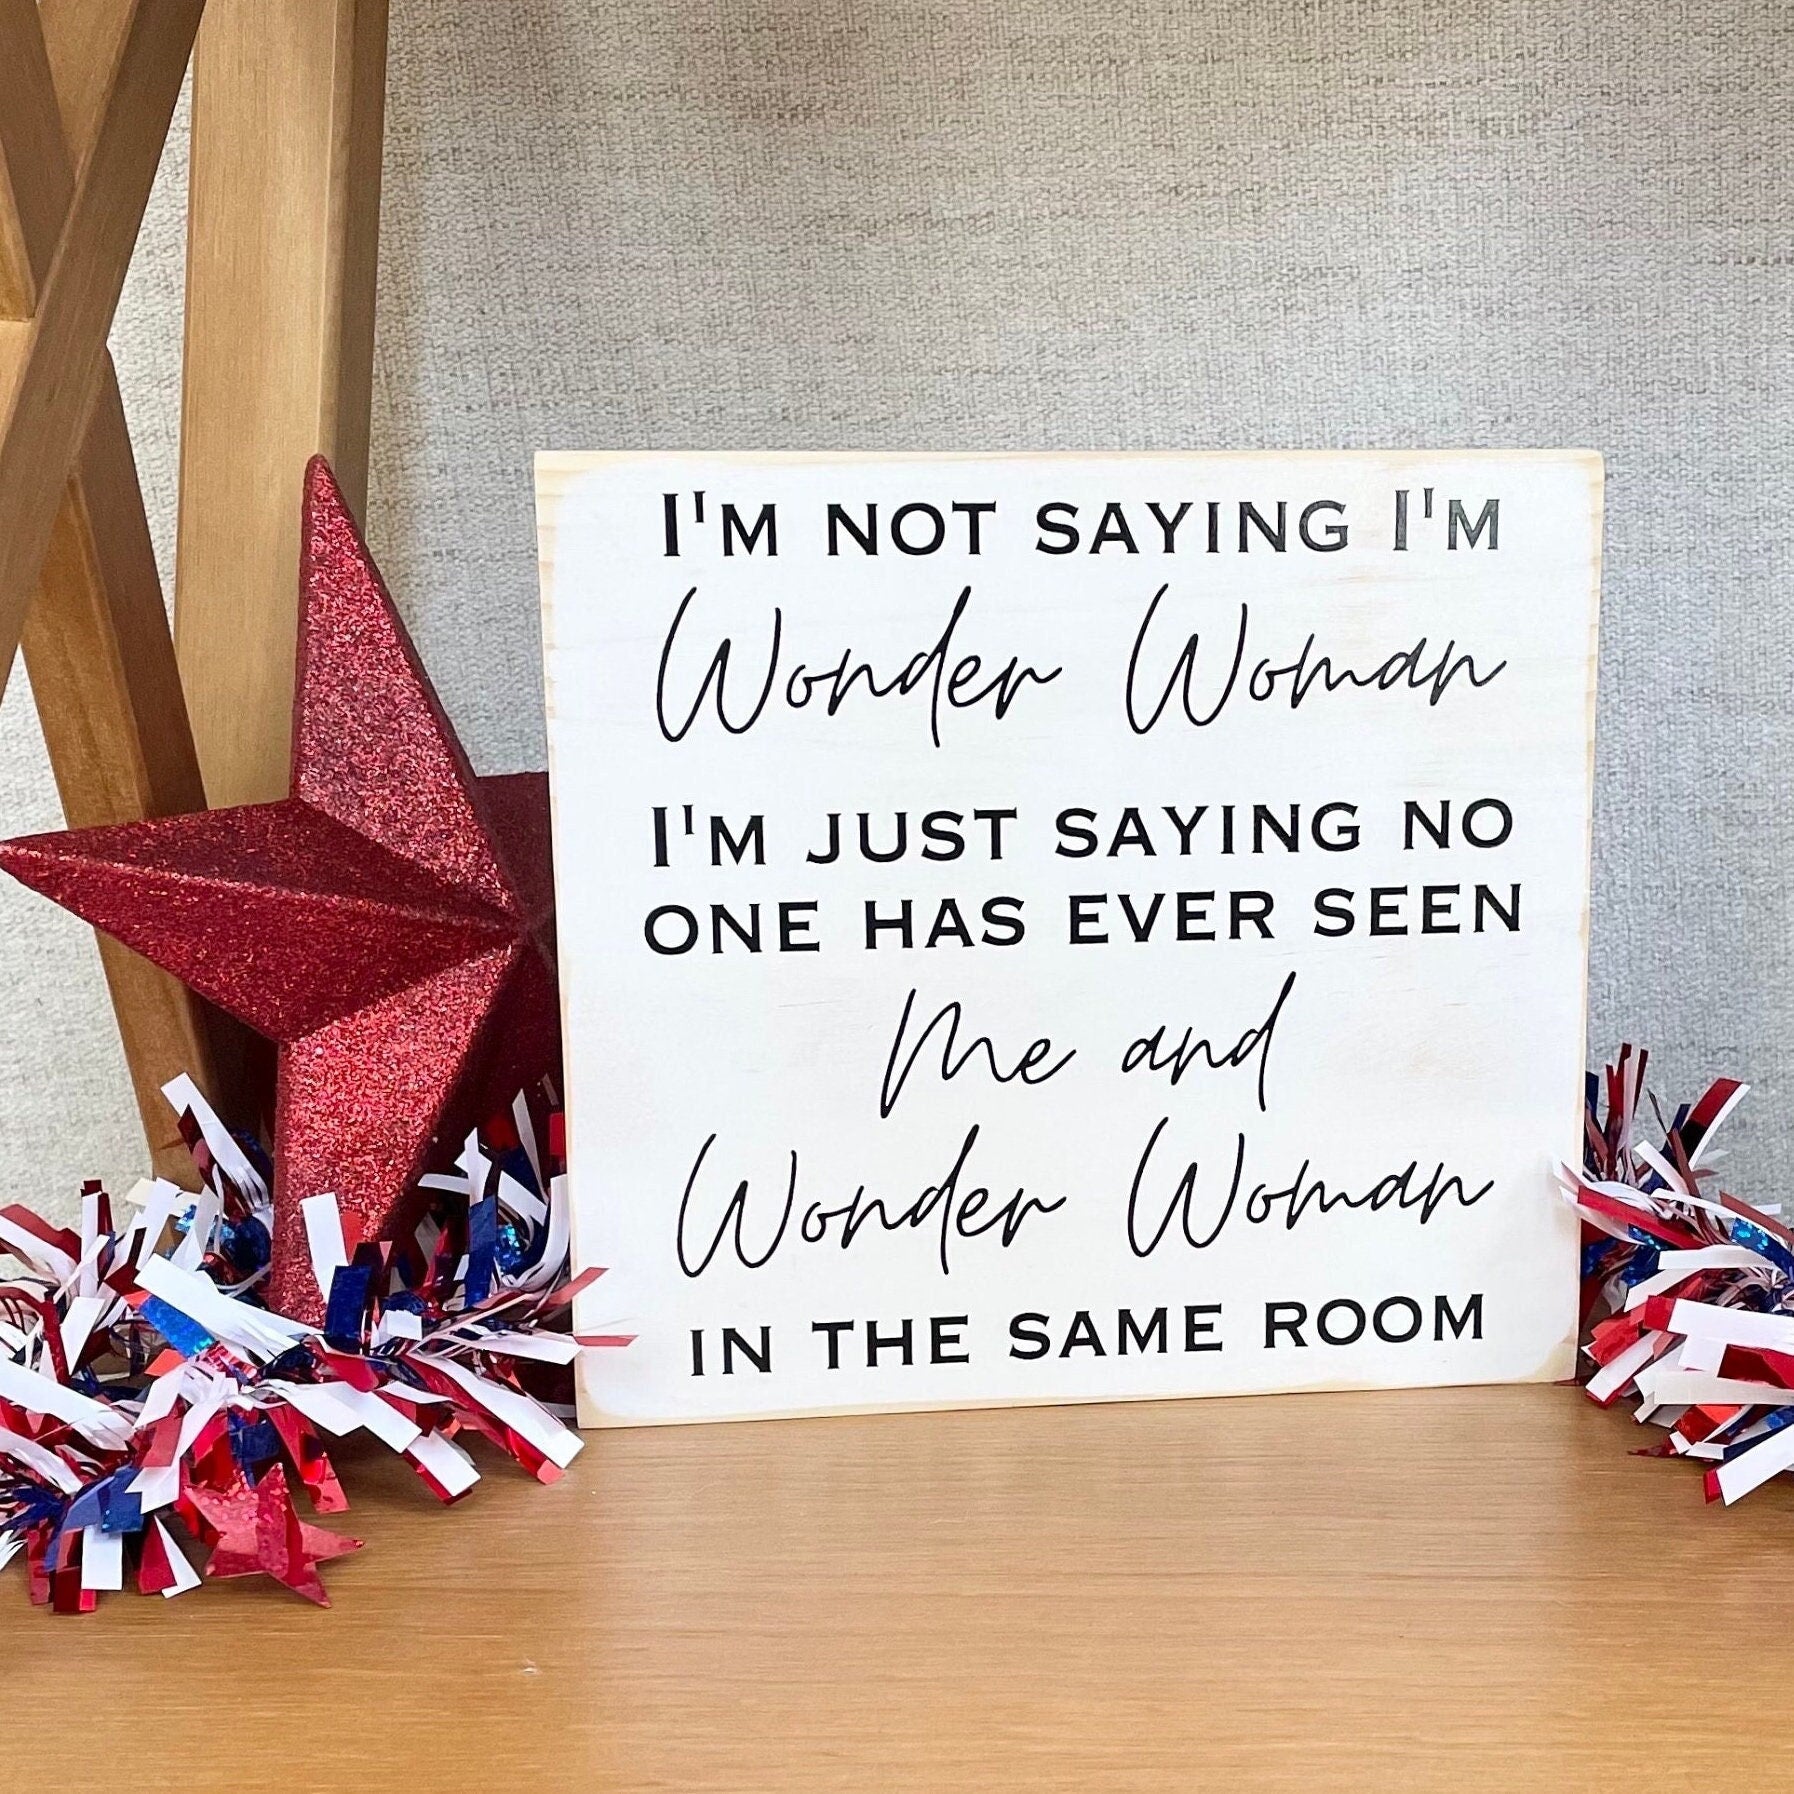 medium sized square wood sign painted white with black lettering that reads, " I'm not saying I'm Wonder Woman, I'm just saying no one has ever seen me and Wonder Woman in the same room". All text is in all caps except for "Wonder Woman" and "Me and Wonder Woman". Text is centered, takes up the entire area and is on 7 lines. Glossy finish.